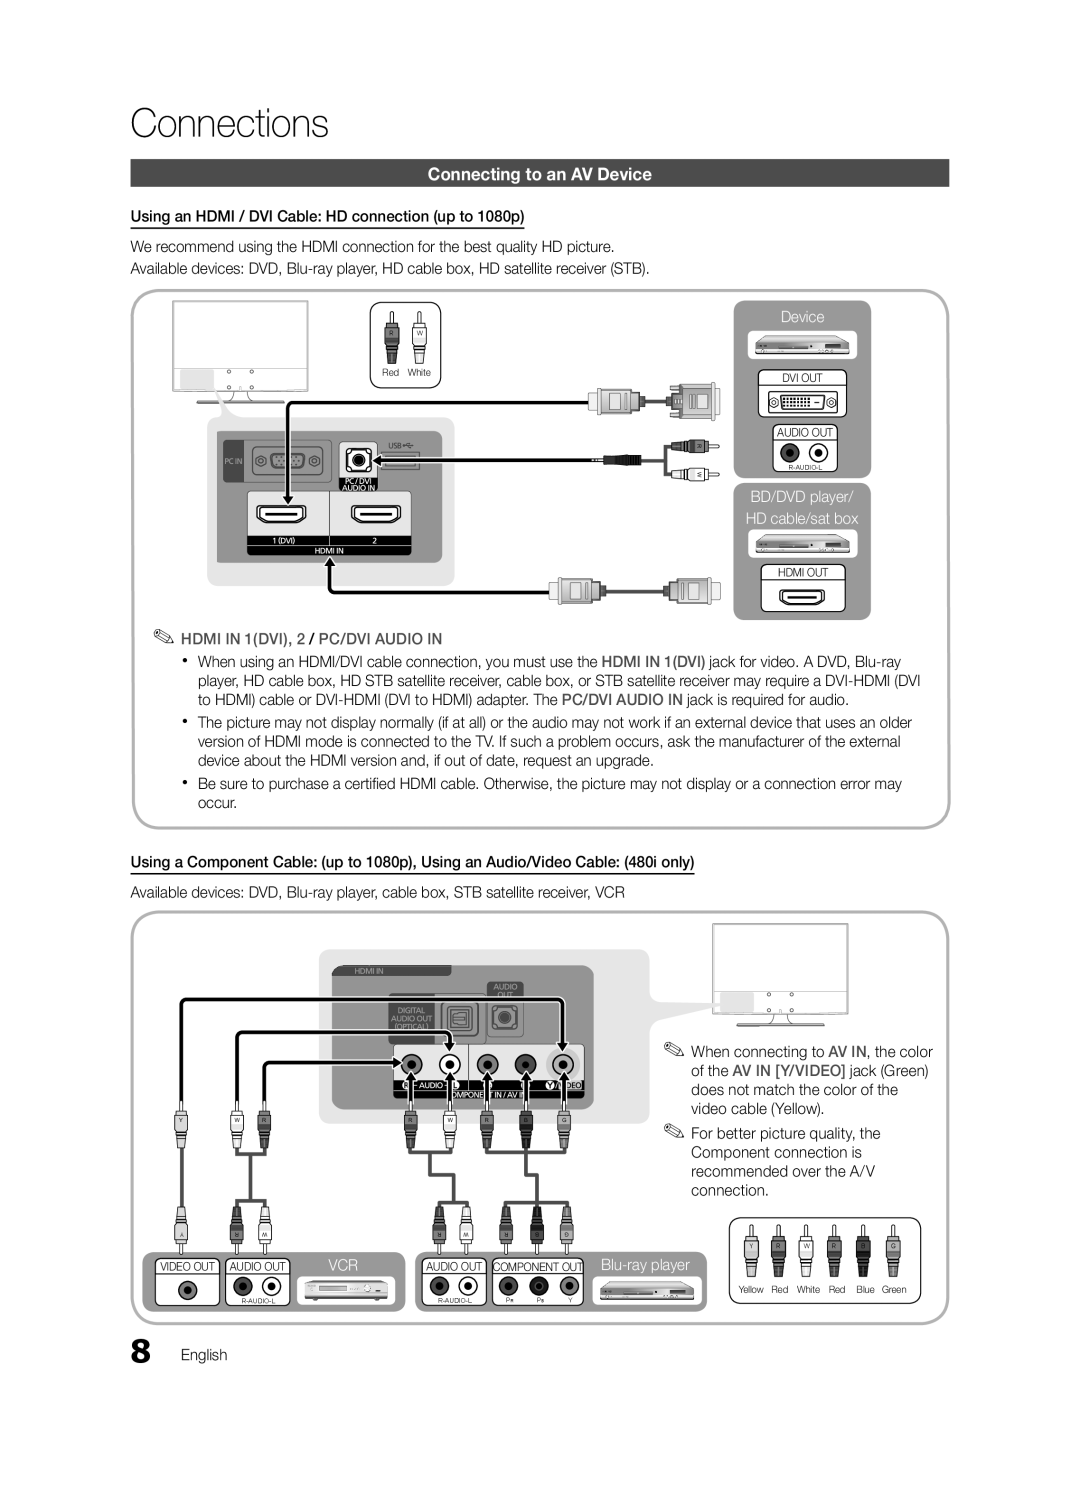 Samsung BN68-02620B-06 user manual Connections, Connecting to an AV Device, HDMI IN 1DVI, 2 / PC/DVI AUDIO IN 